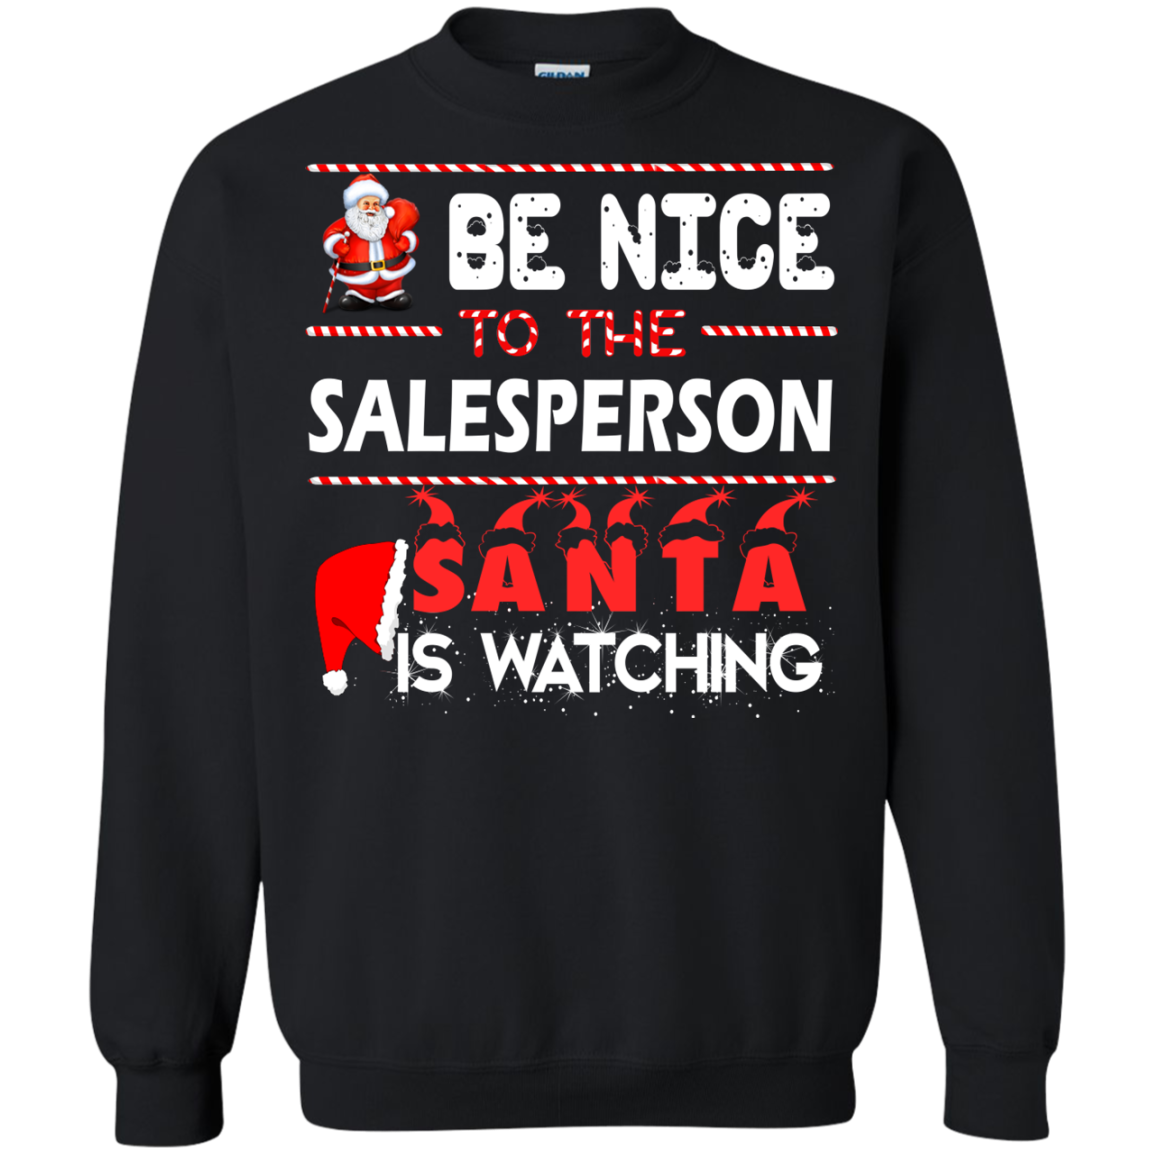 Be nice to the salesperson Santa is watching sweater, shirt